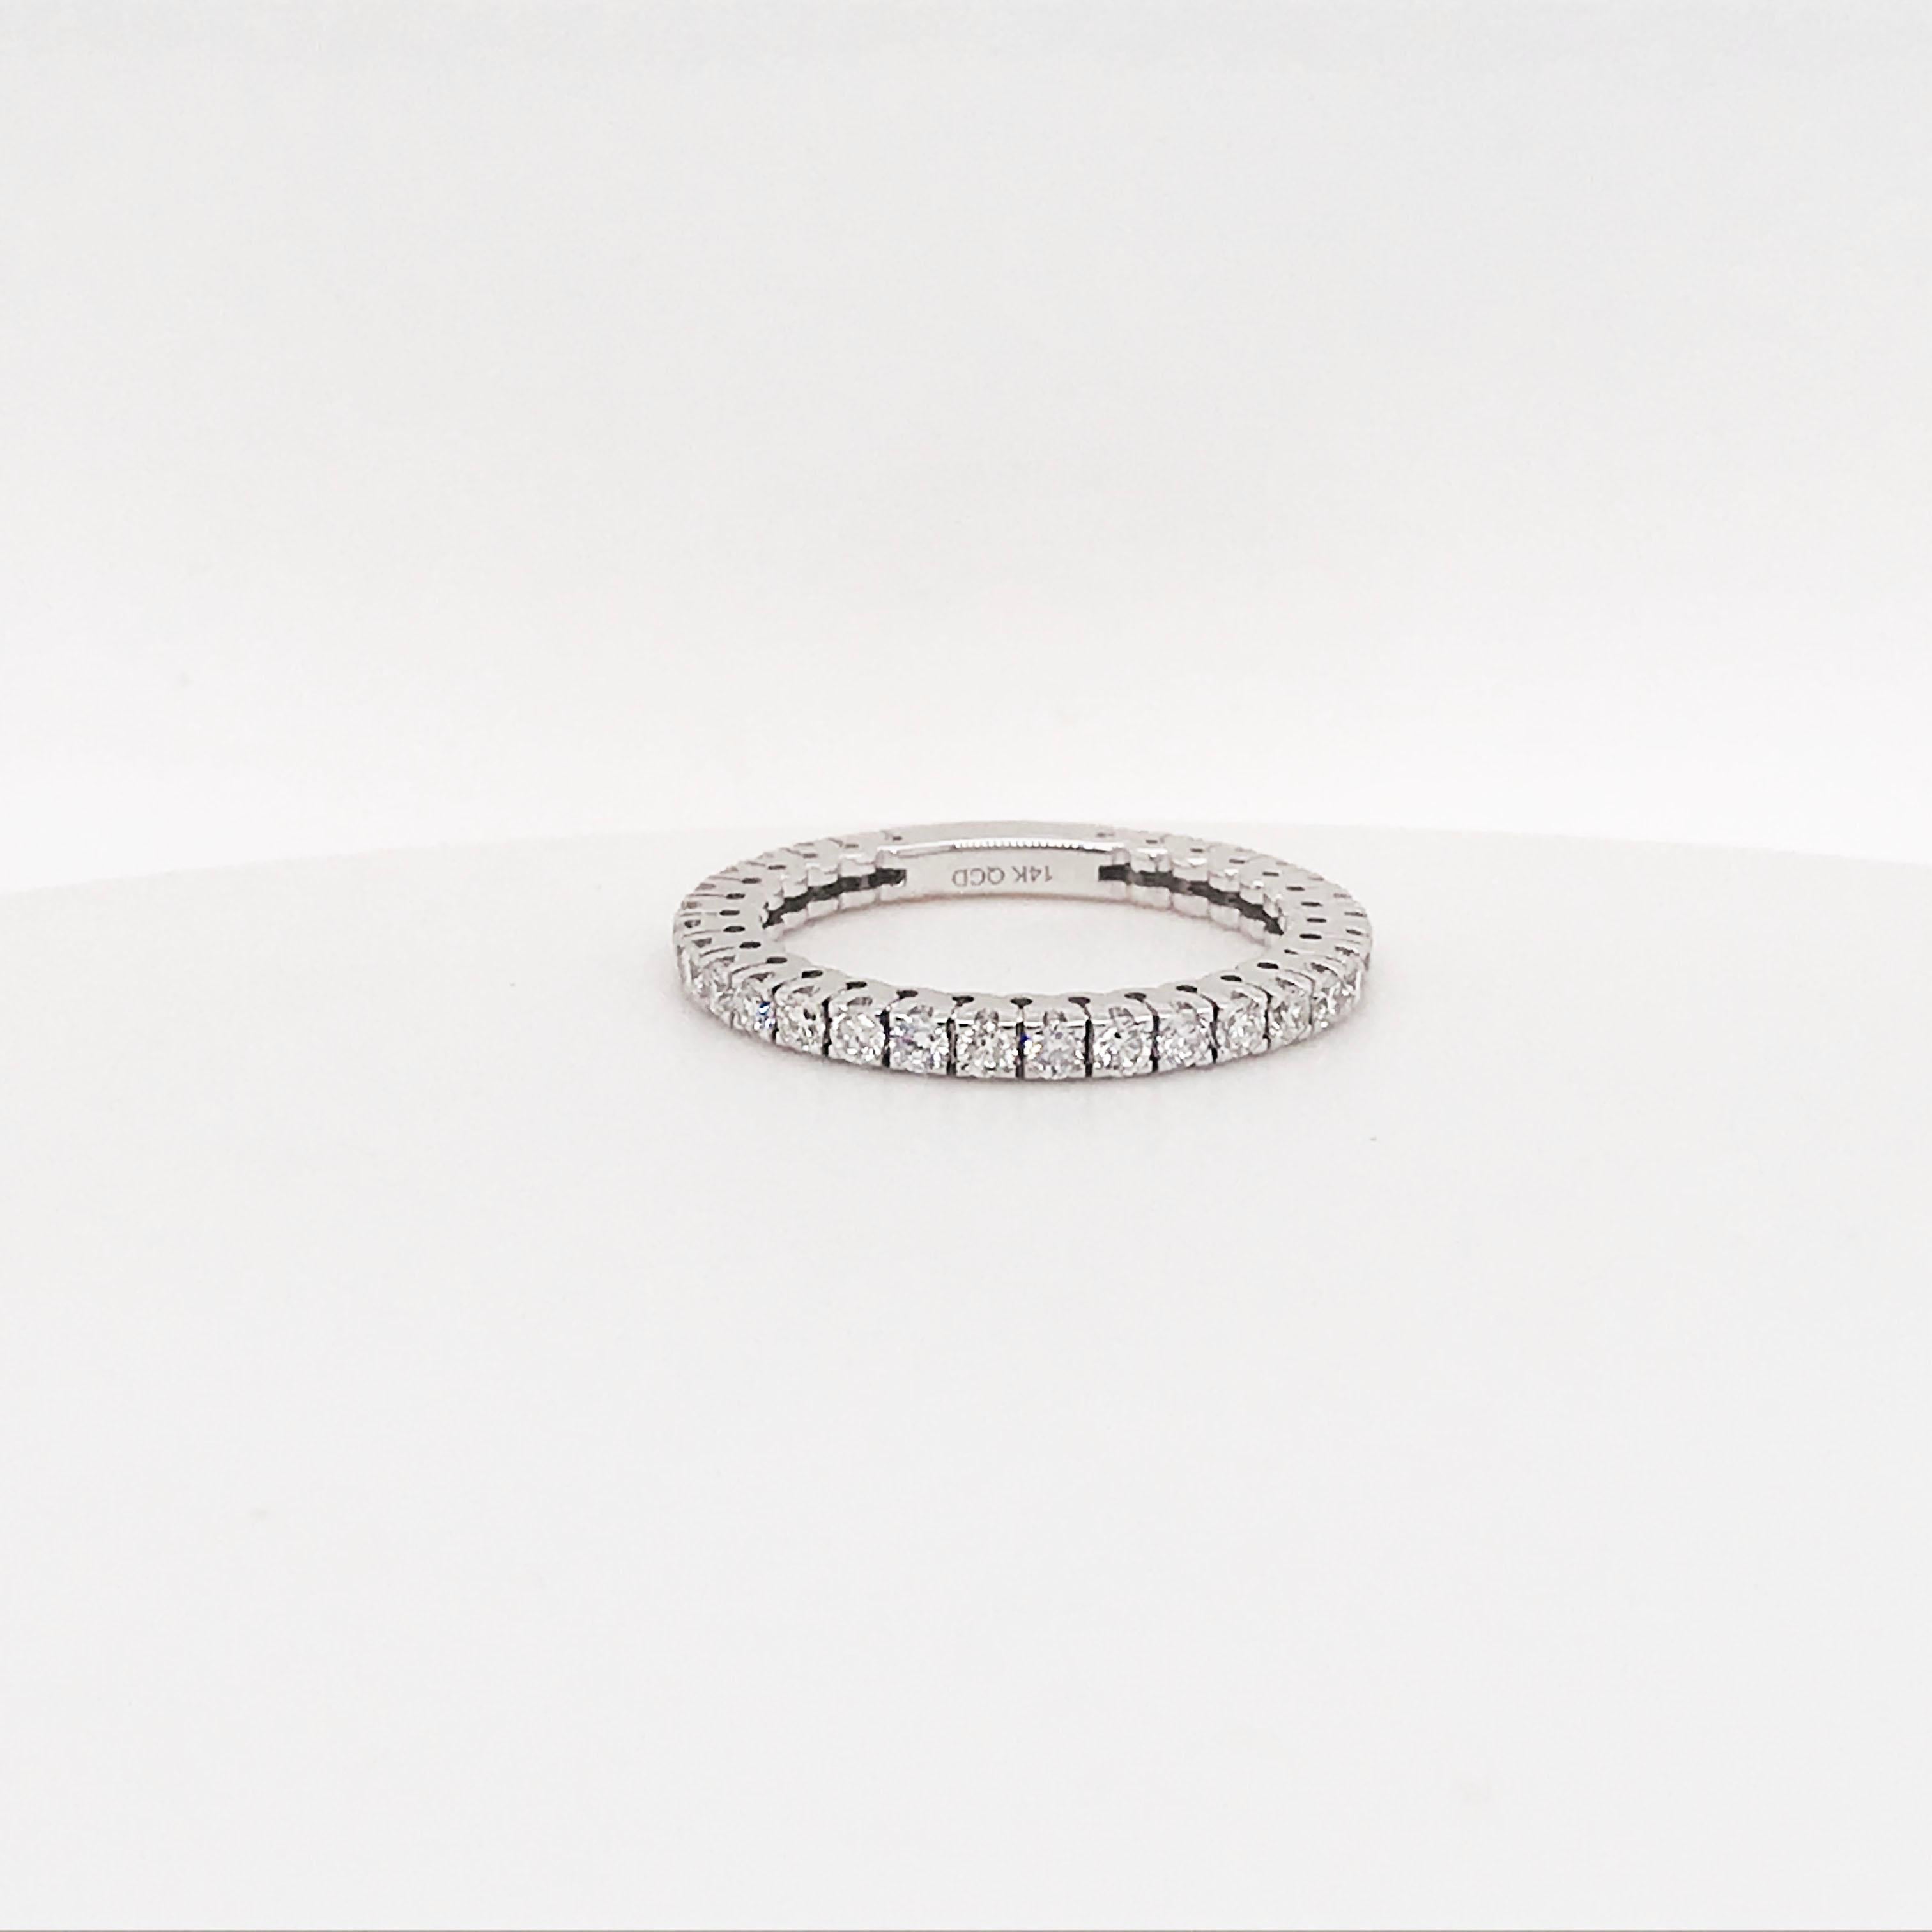 Diamond bands are a classic jewelry staple! Every woman wants one and every women deserves one. This diamond band has round brilliant diamonds going 4/5 around the entire ring. There is a small sizing bar in the back for future resizing. The